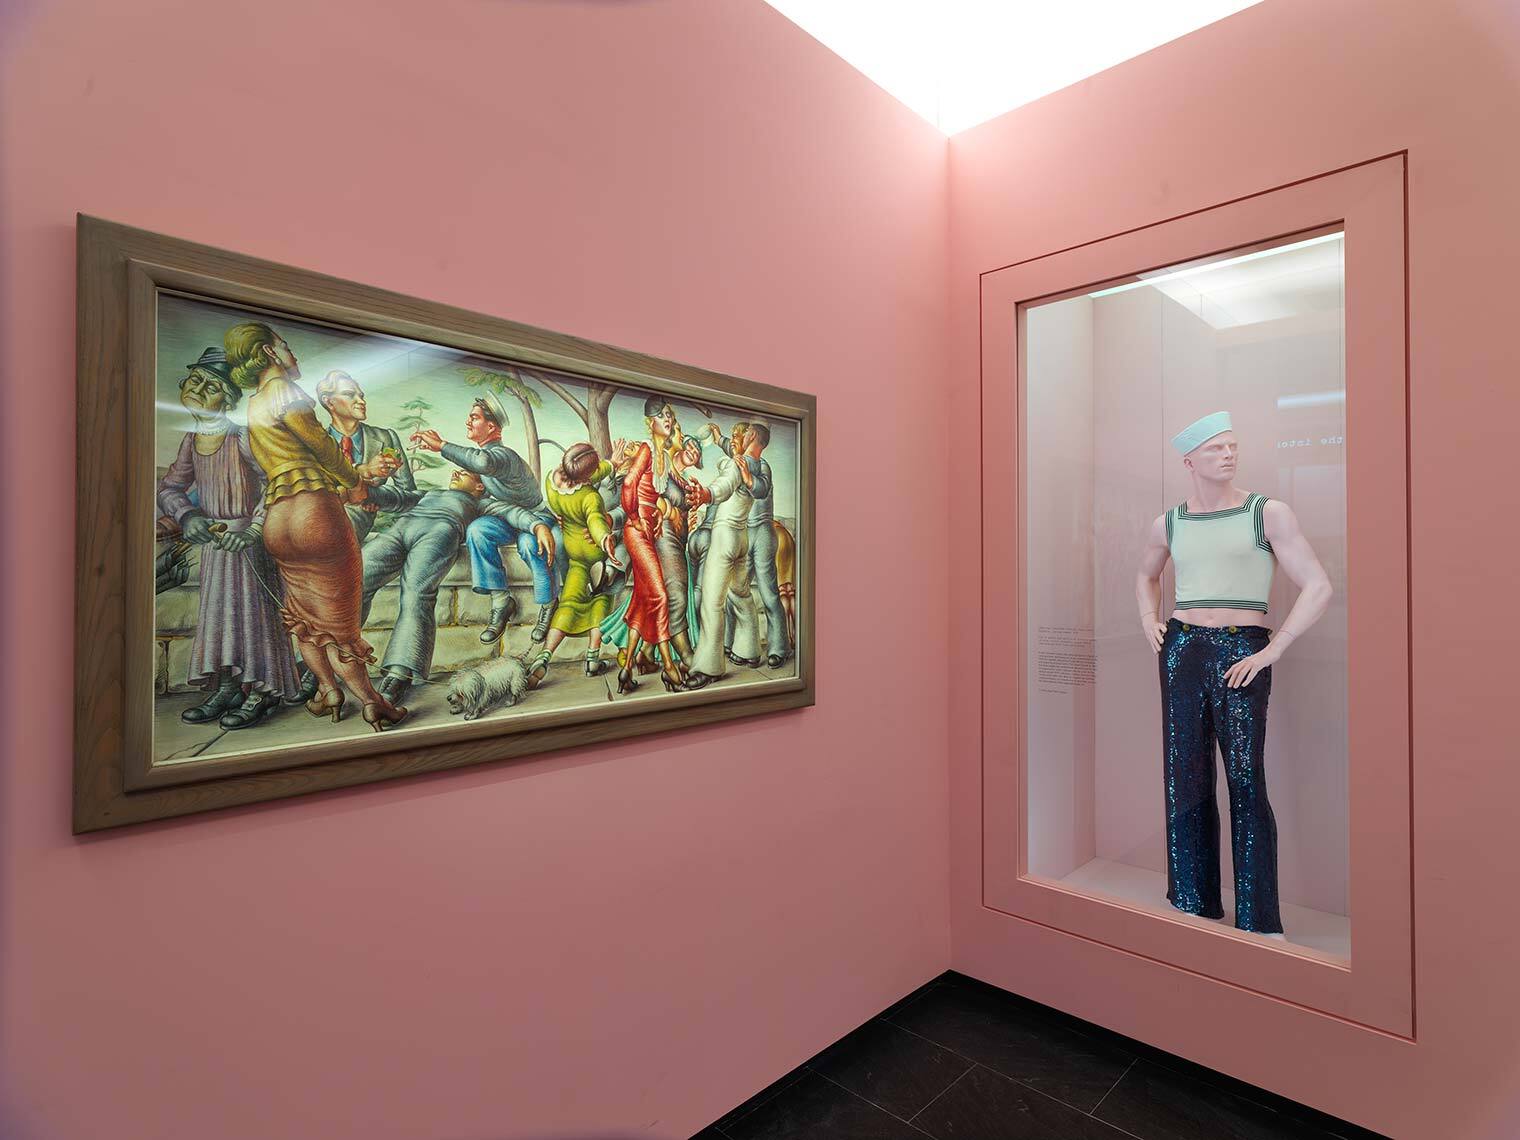 A photograph depicting Cadmus's painting next to a sailor outfit in the exhibition Camp